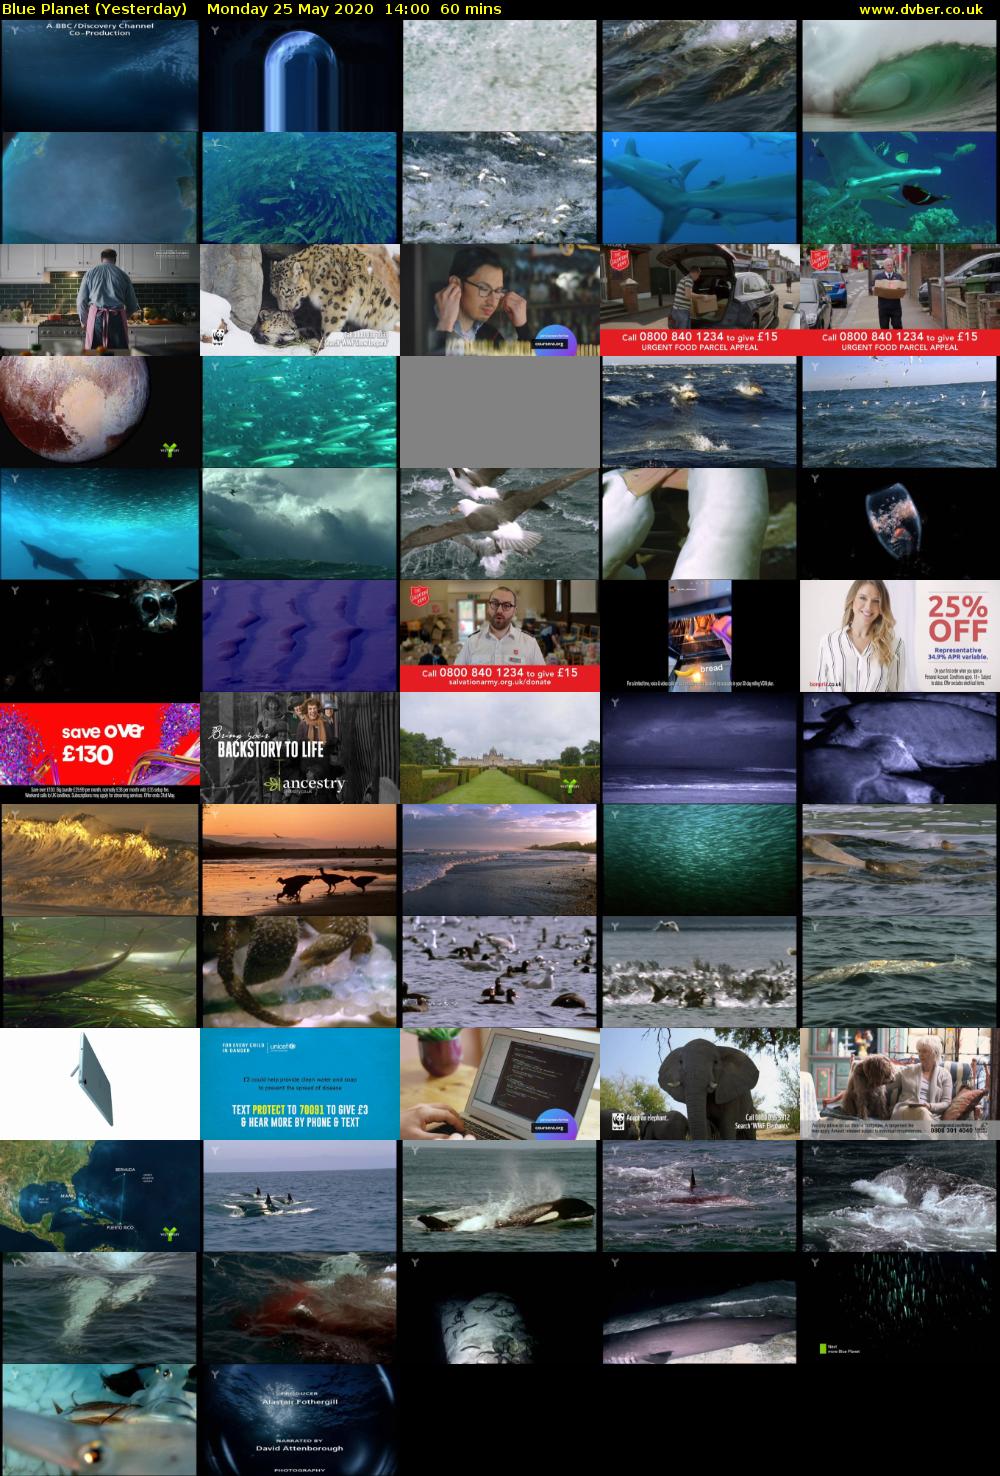 Blue Planet (Yesterday) Monday 25 May 2020 14:00 - 15:00